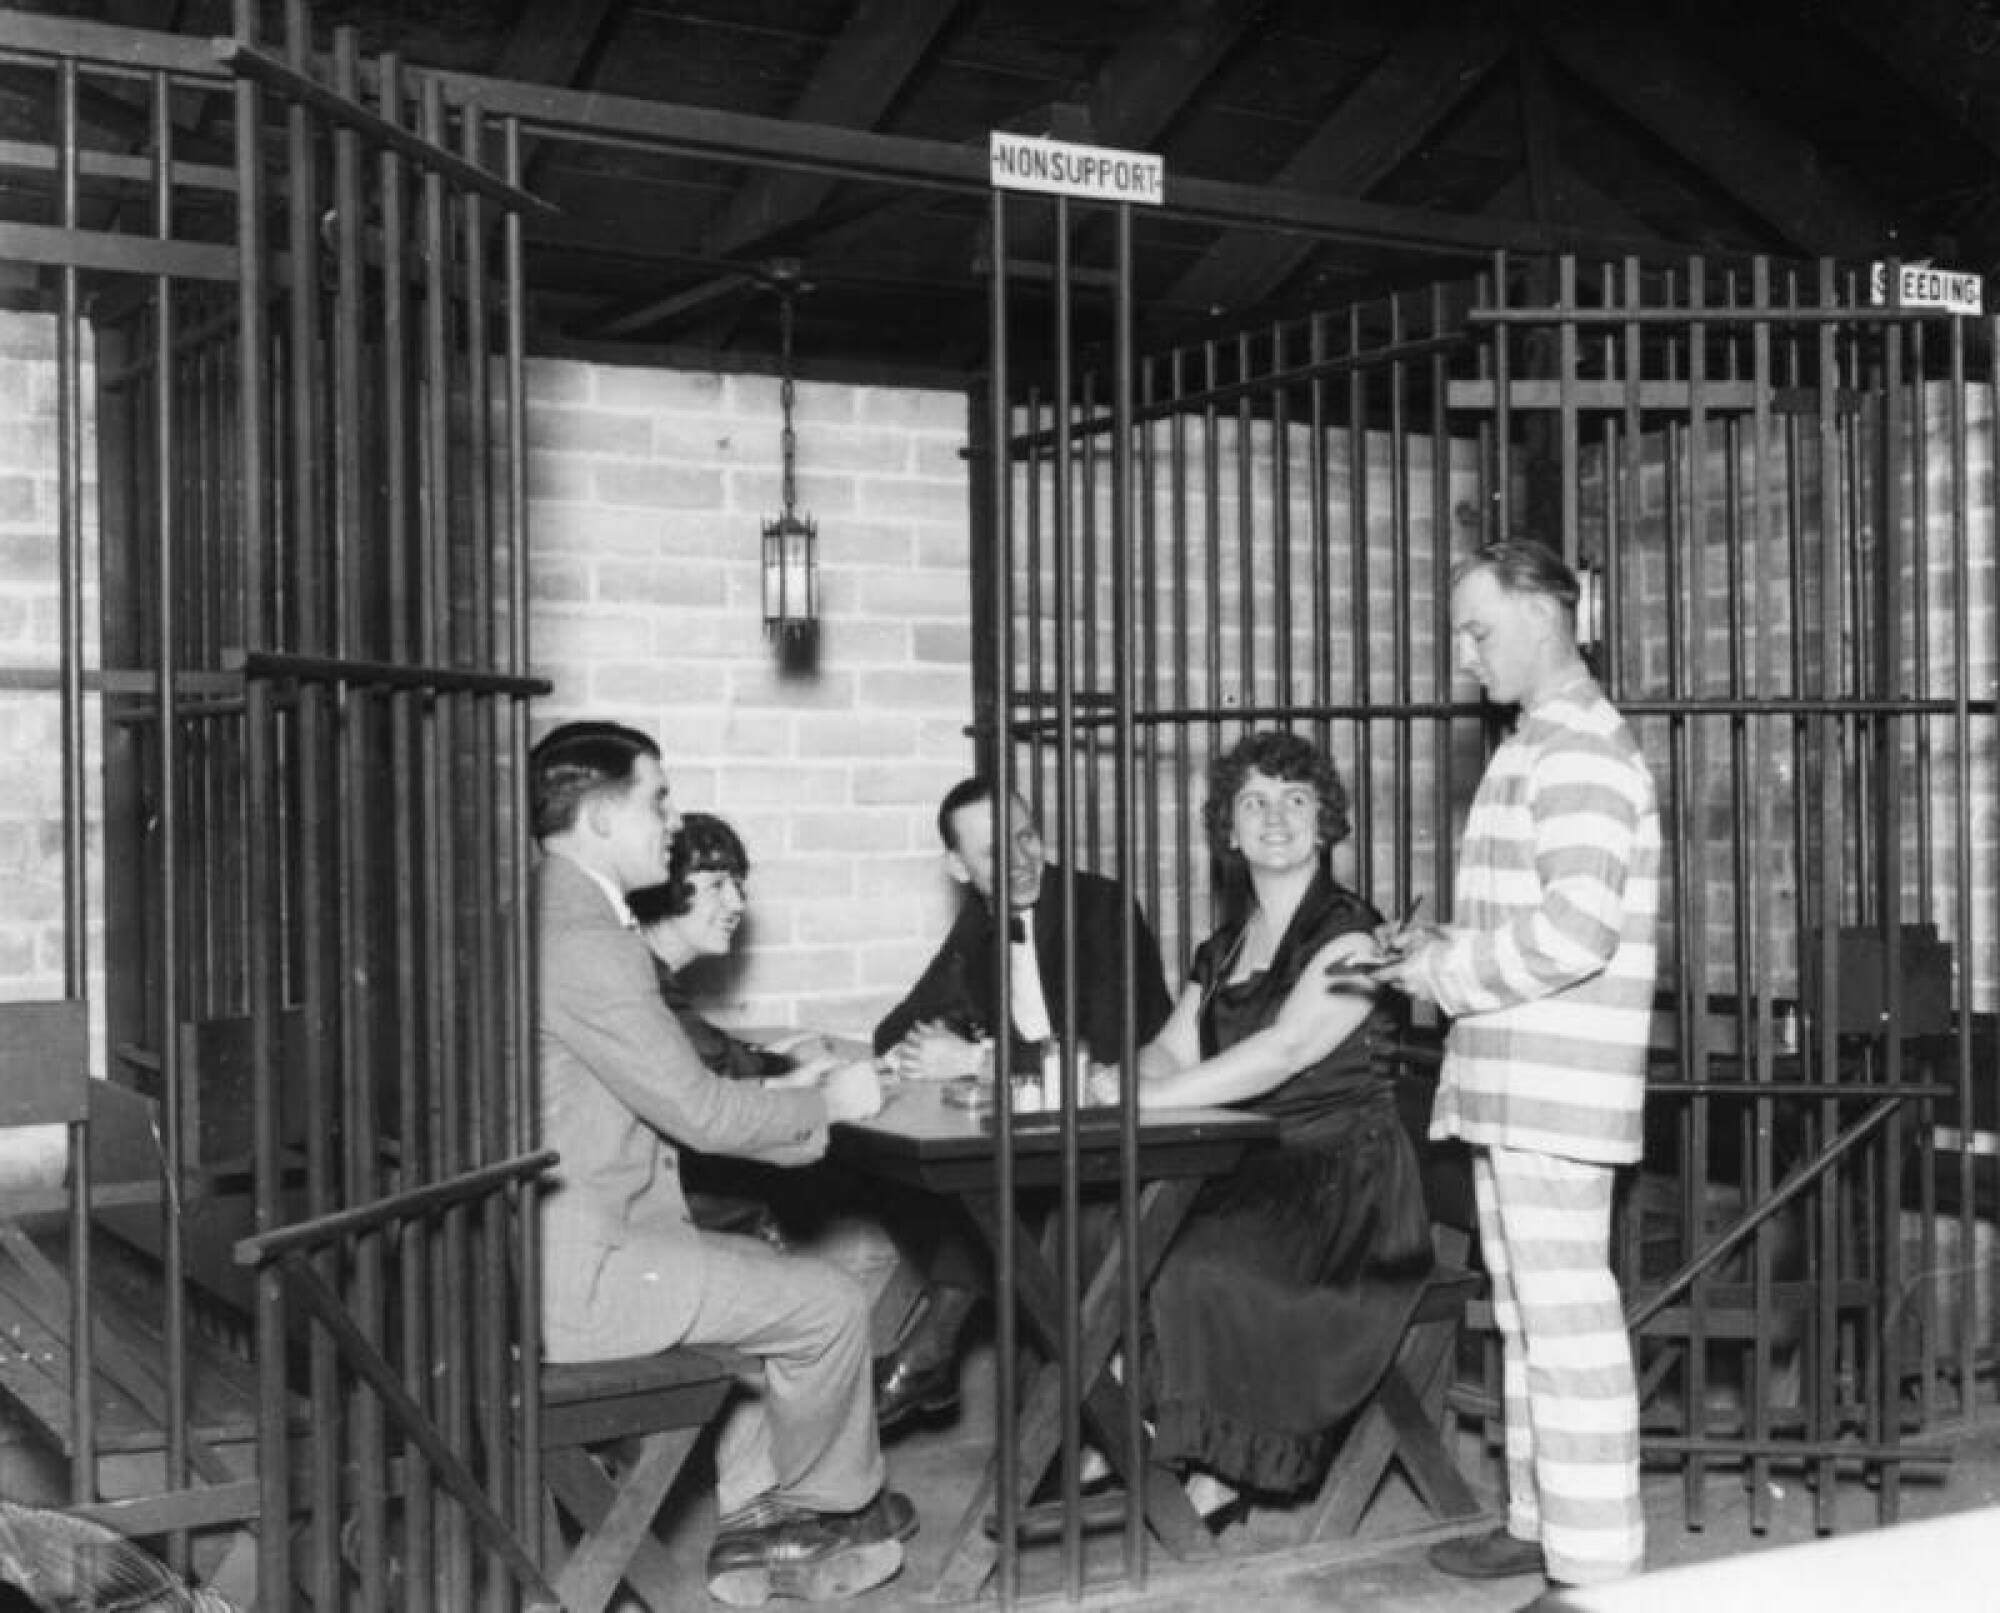 Two couples dining in a cell at the Jail Cafe, which opened in 1925 in Hollywood.